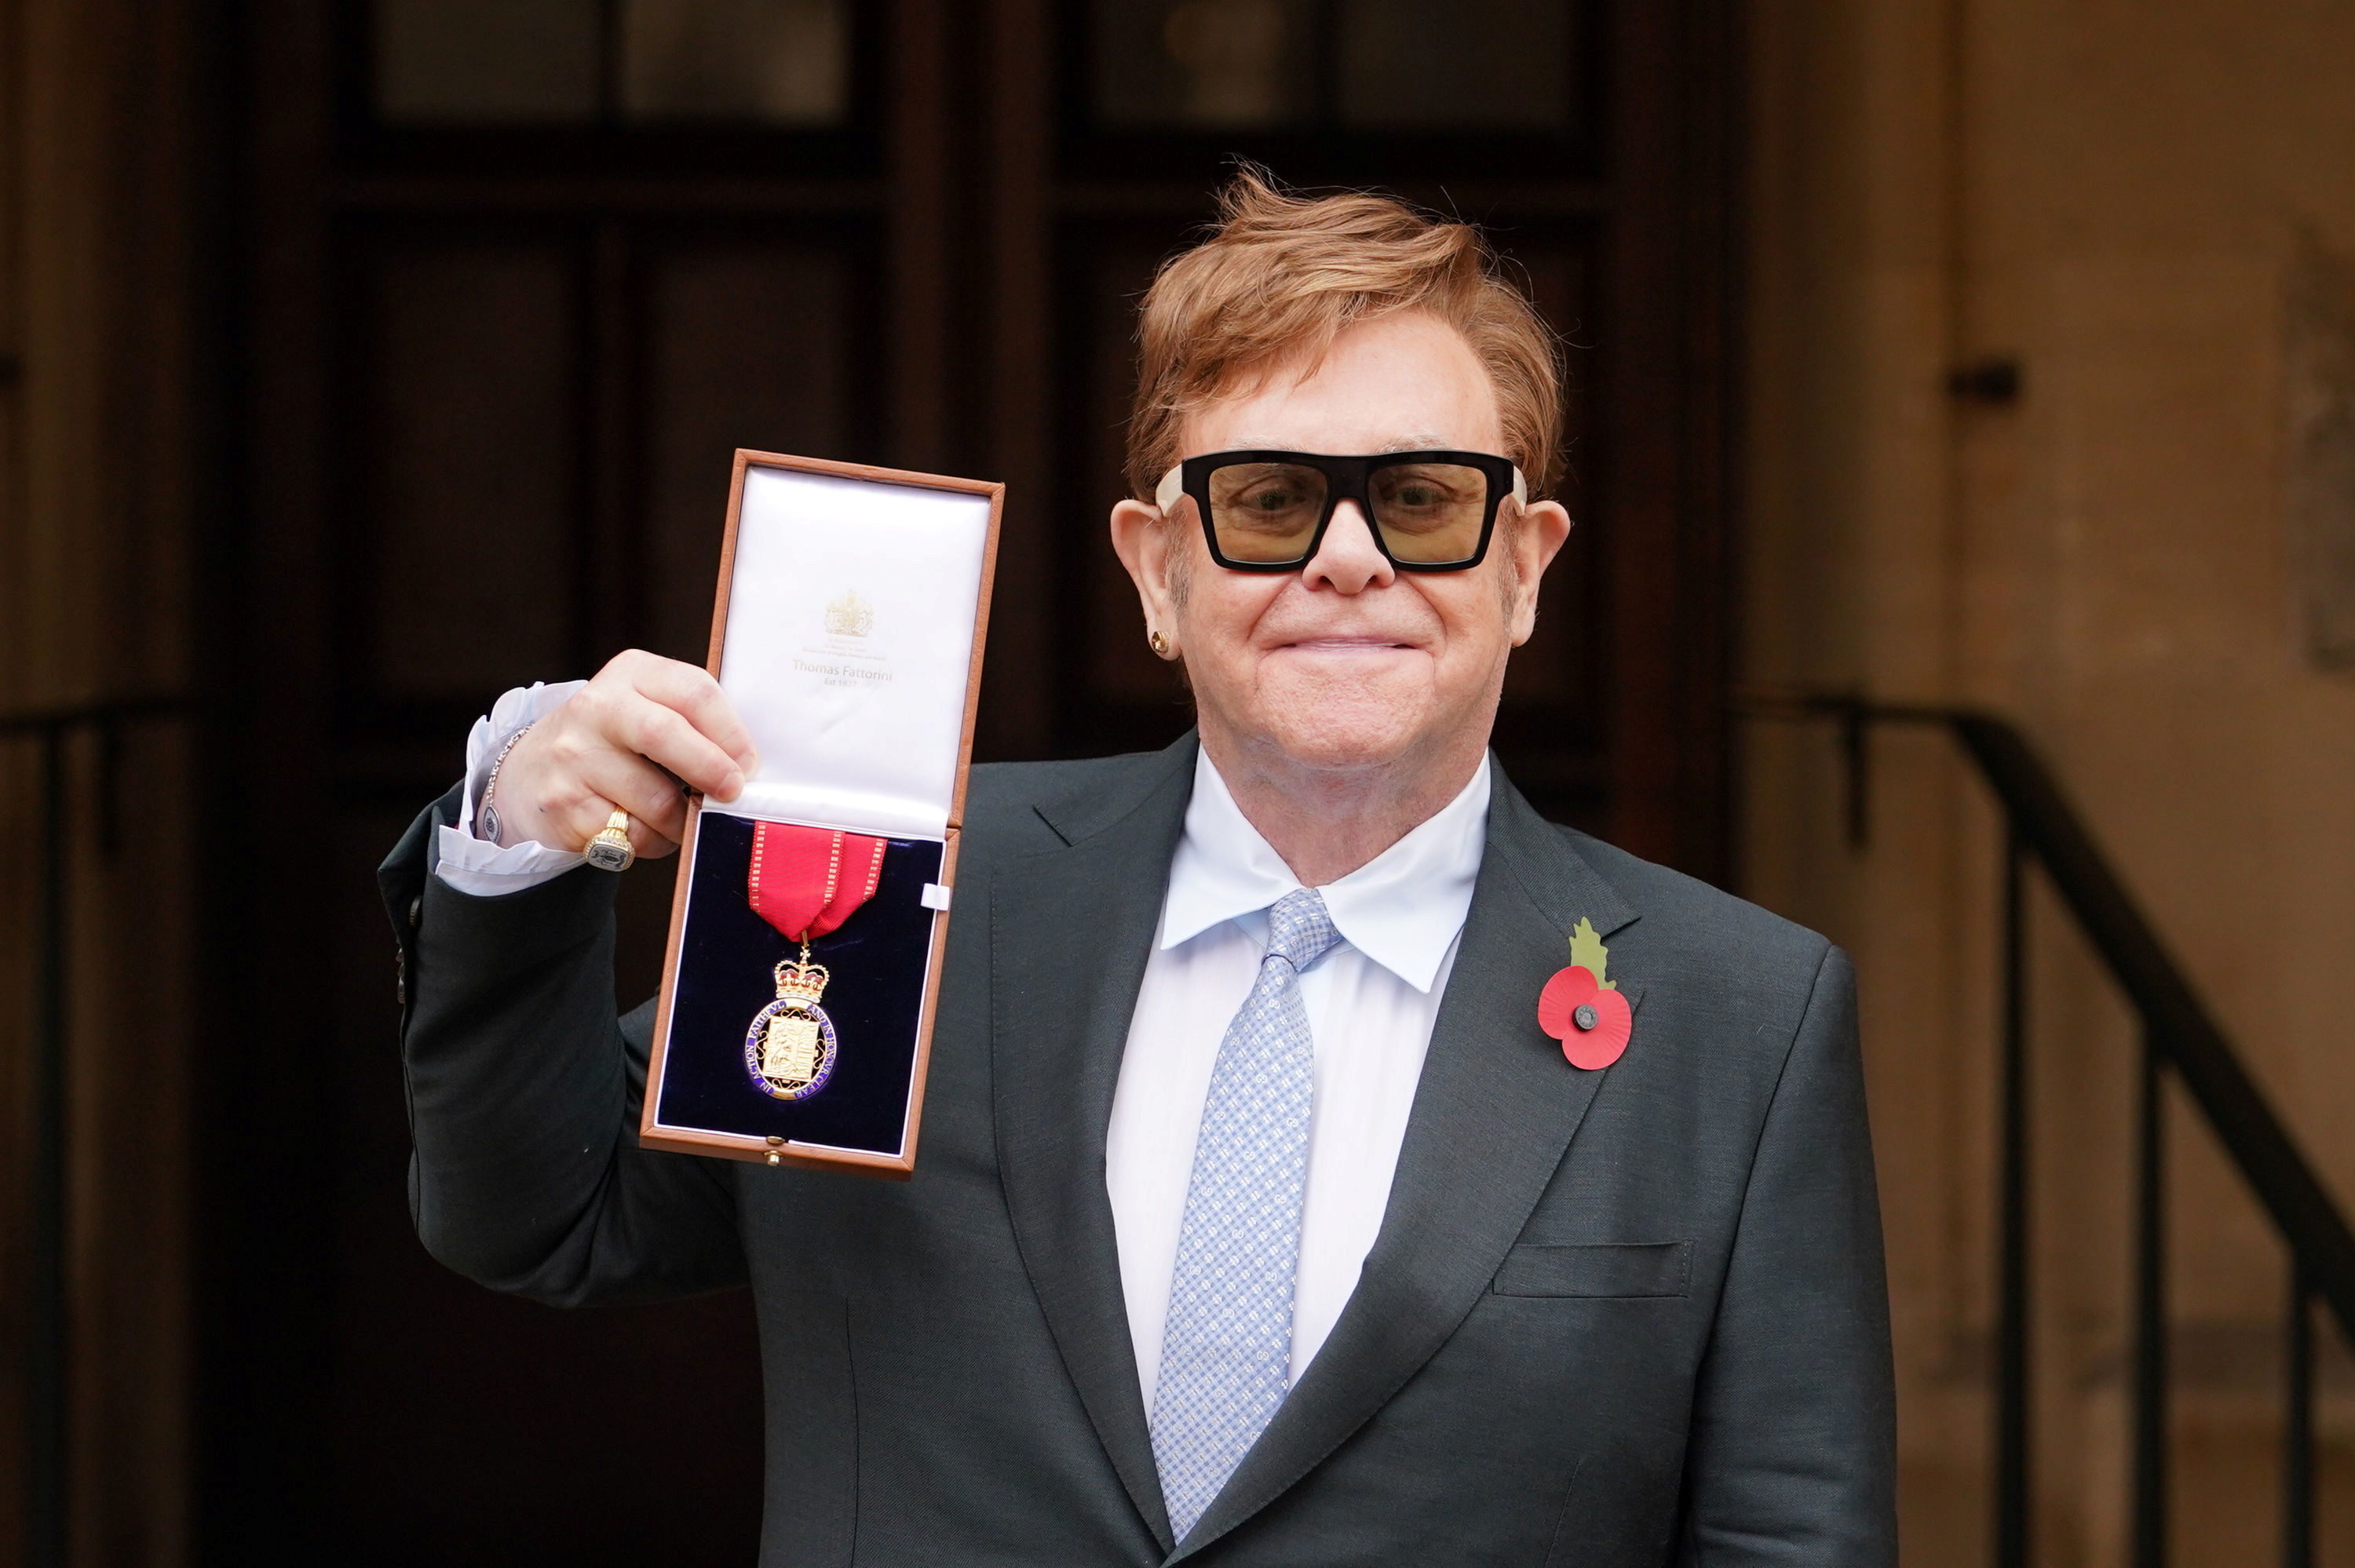 Musician Elton John poses after being made a member of the Order of the Companions of Honour for services to Music and to Charity during an investiture ceremony at Windsor Castle in Windsor, Britain, November 10, 2021. Dominic Lipinski/Pool via REUTERS